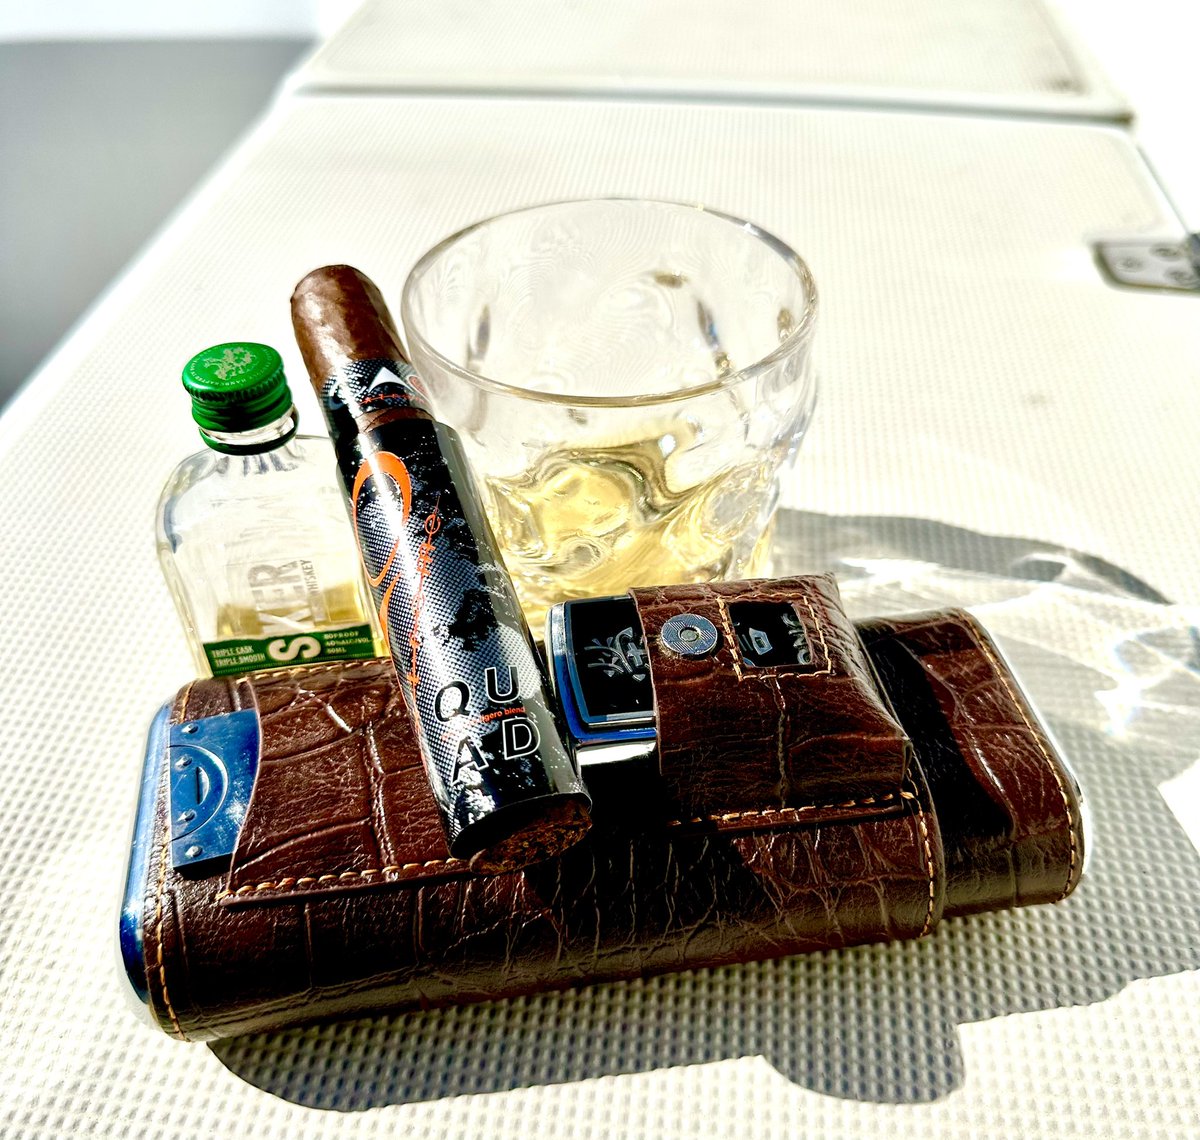 Another Sunday, some boat work, and my excuse to relax with a @caocigars Quad… pretty strong-sneaks up 🆙 n you. Paired with a Busker Irish Whiskey… good pairing-might have to try both again! 😇